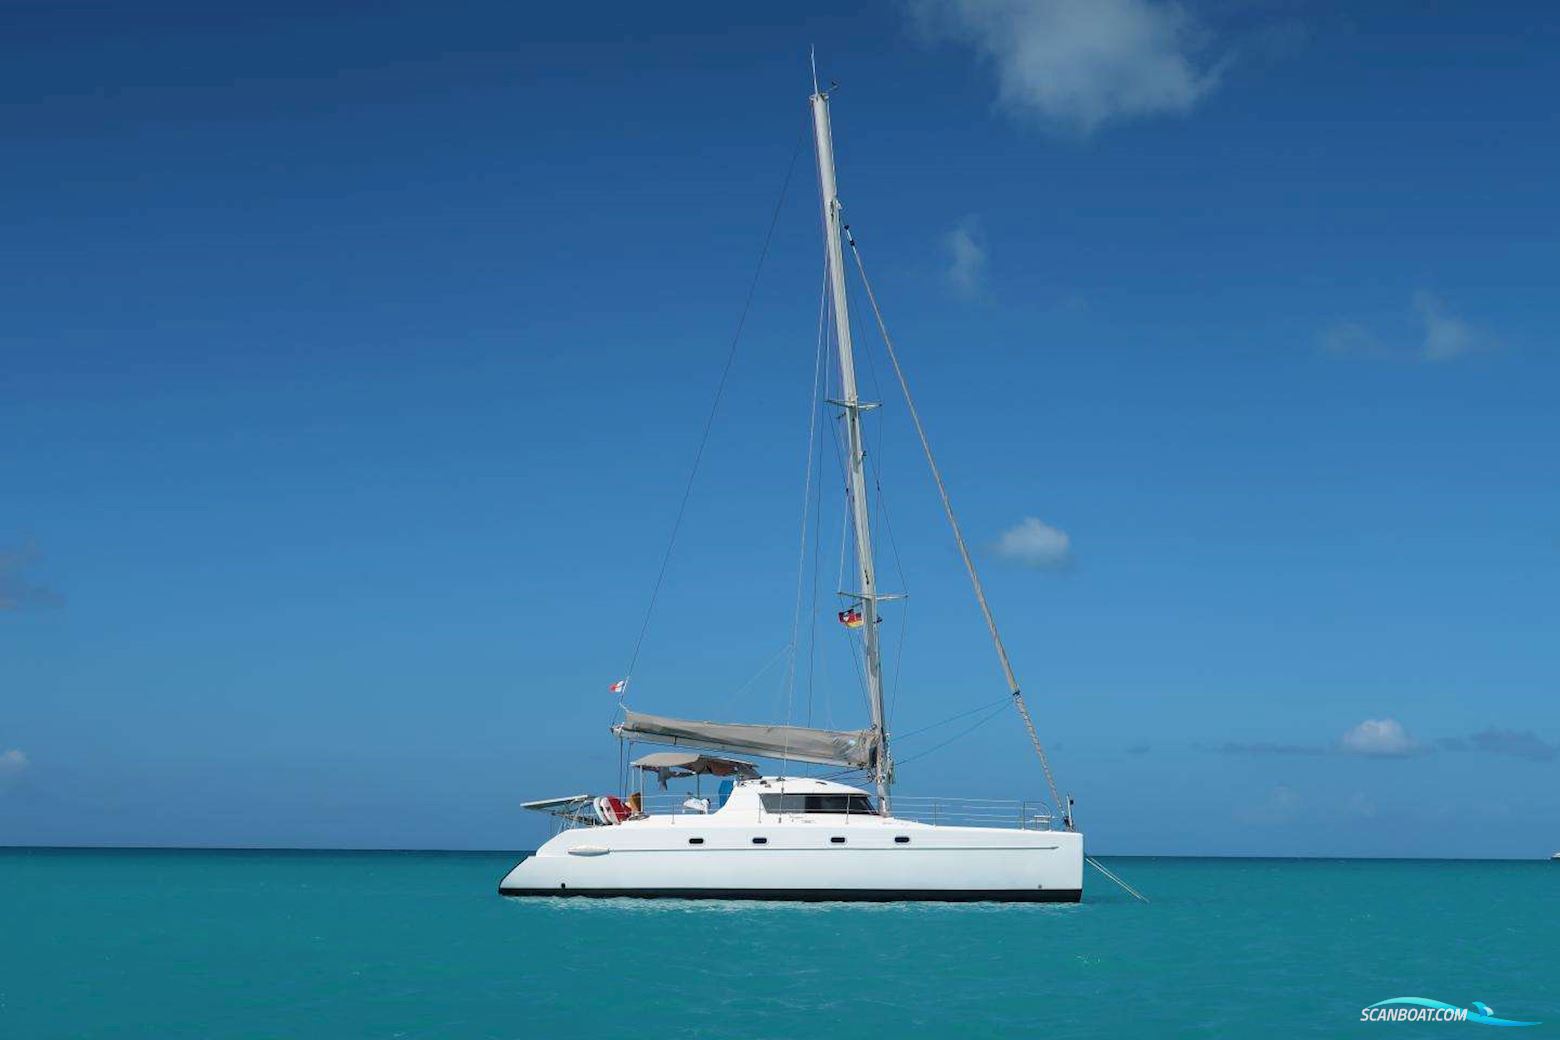 Fountaine Pajot Belize 43 Multi hull boat 2004, with Yanmar 3YM 30 engine, Martinique